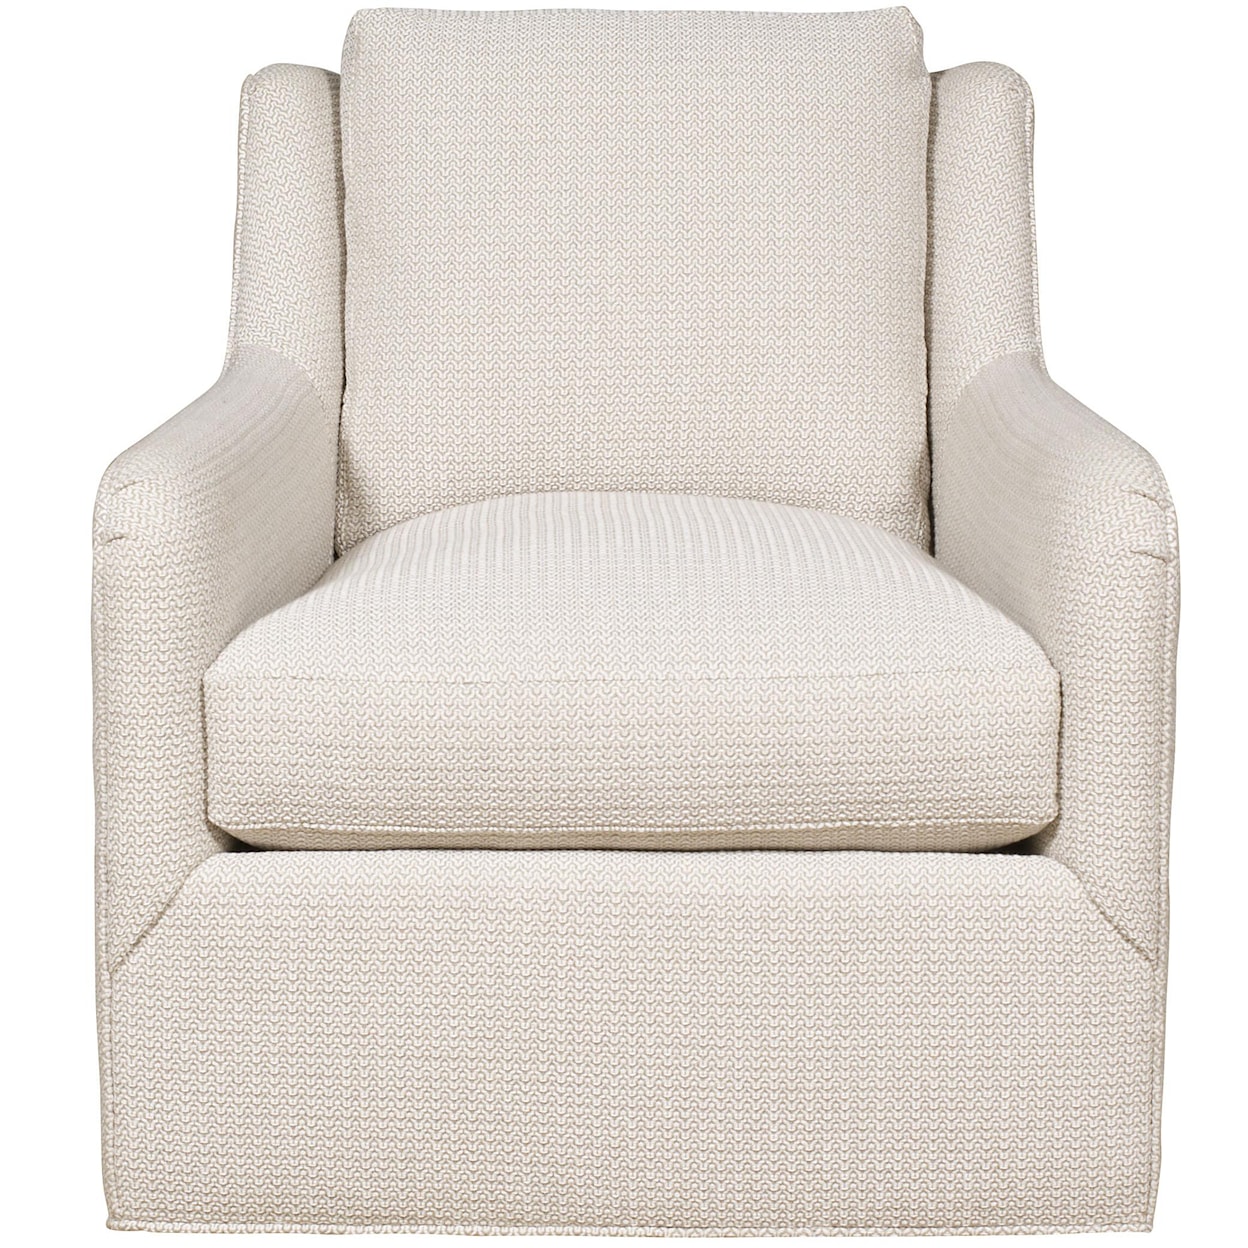 Vanguard Furniture Fisher Contemporary Chair